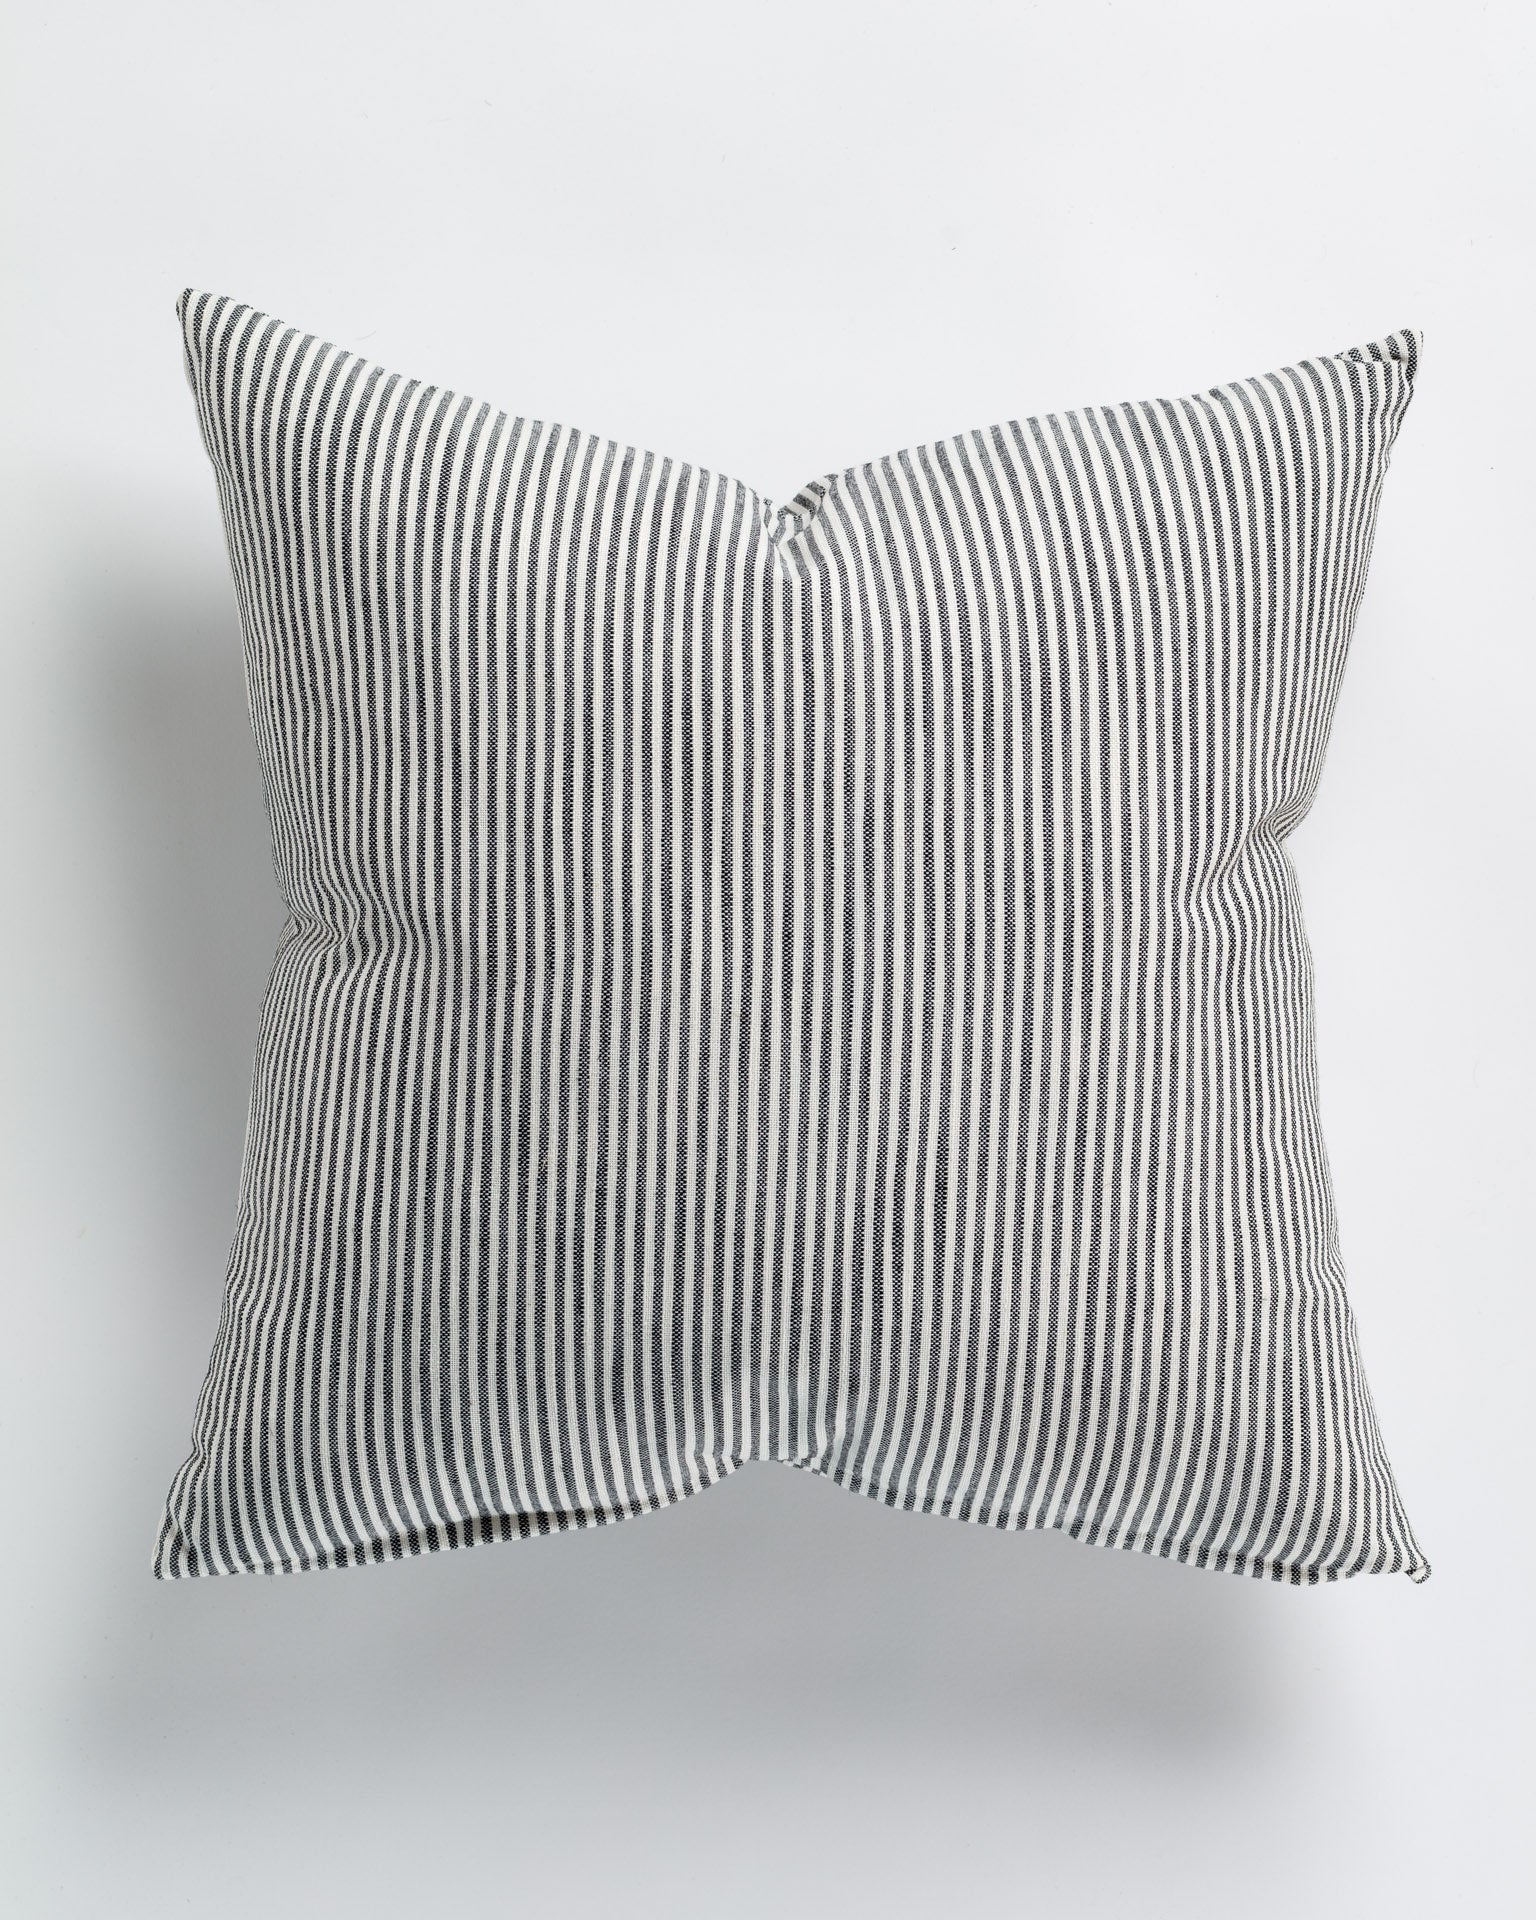 A square Skinny Stripe Classic Pillow 26x26 from Gabby with a black and white striped pattern, displayed against a plain white background in a Scottsdale Arizona bungalow.